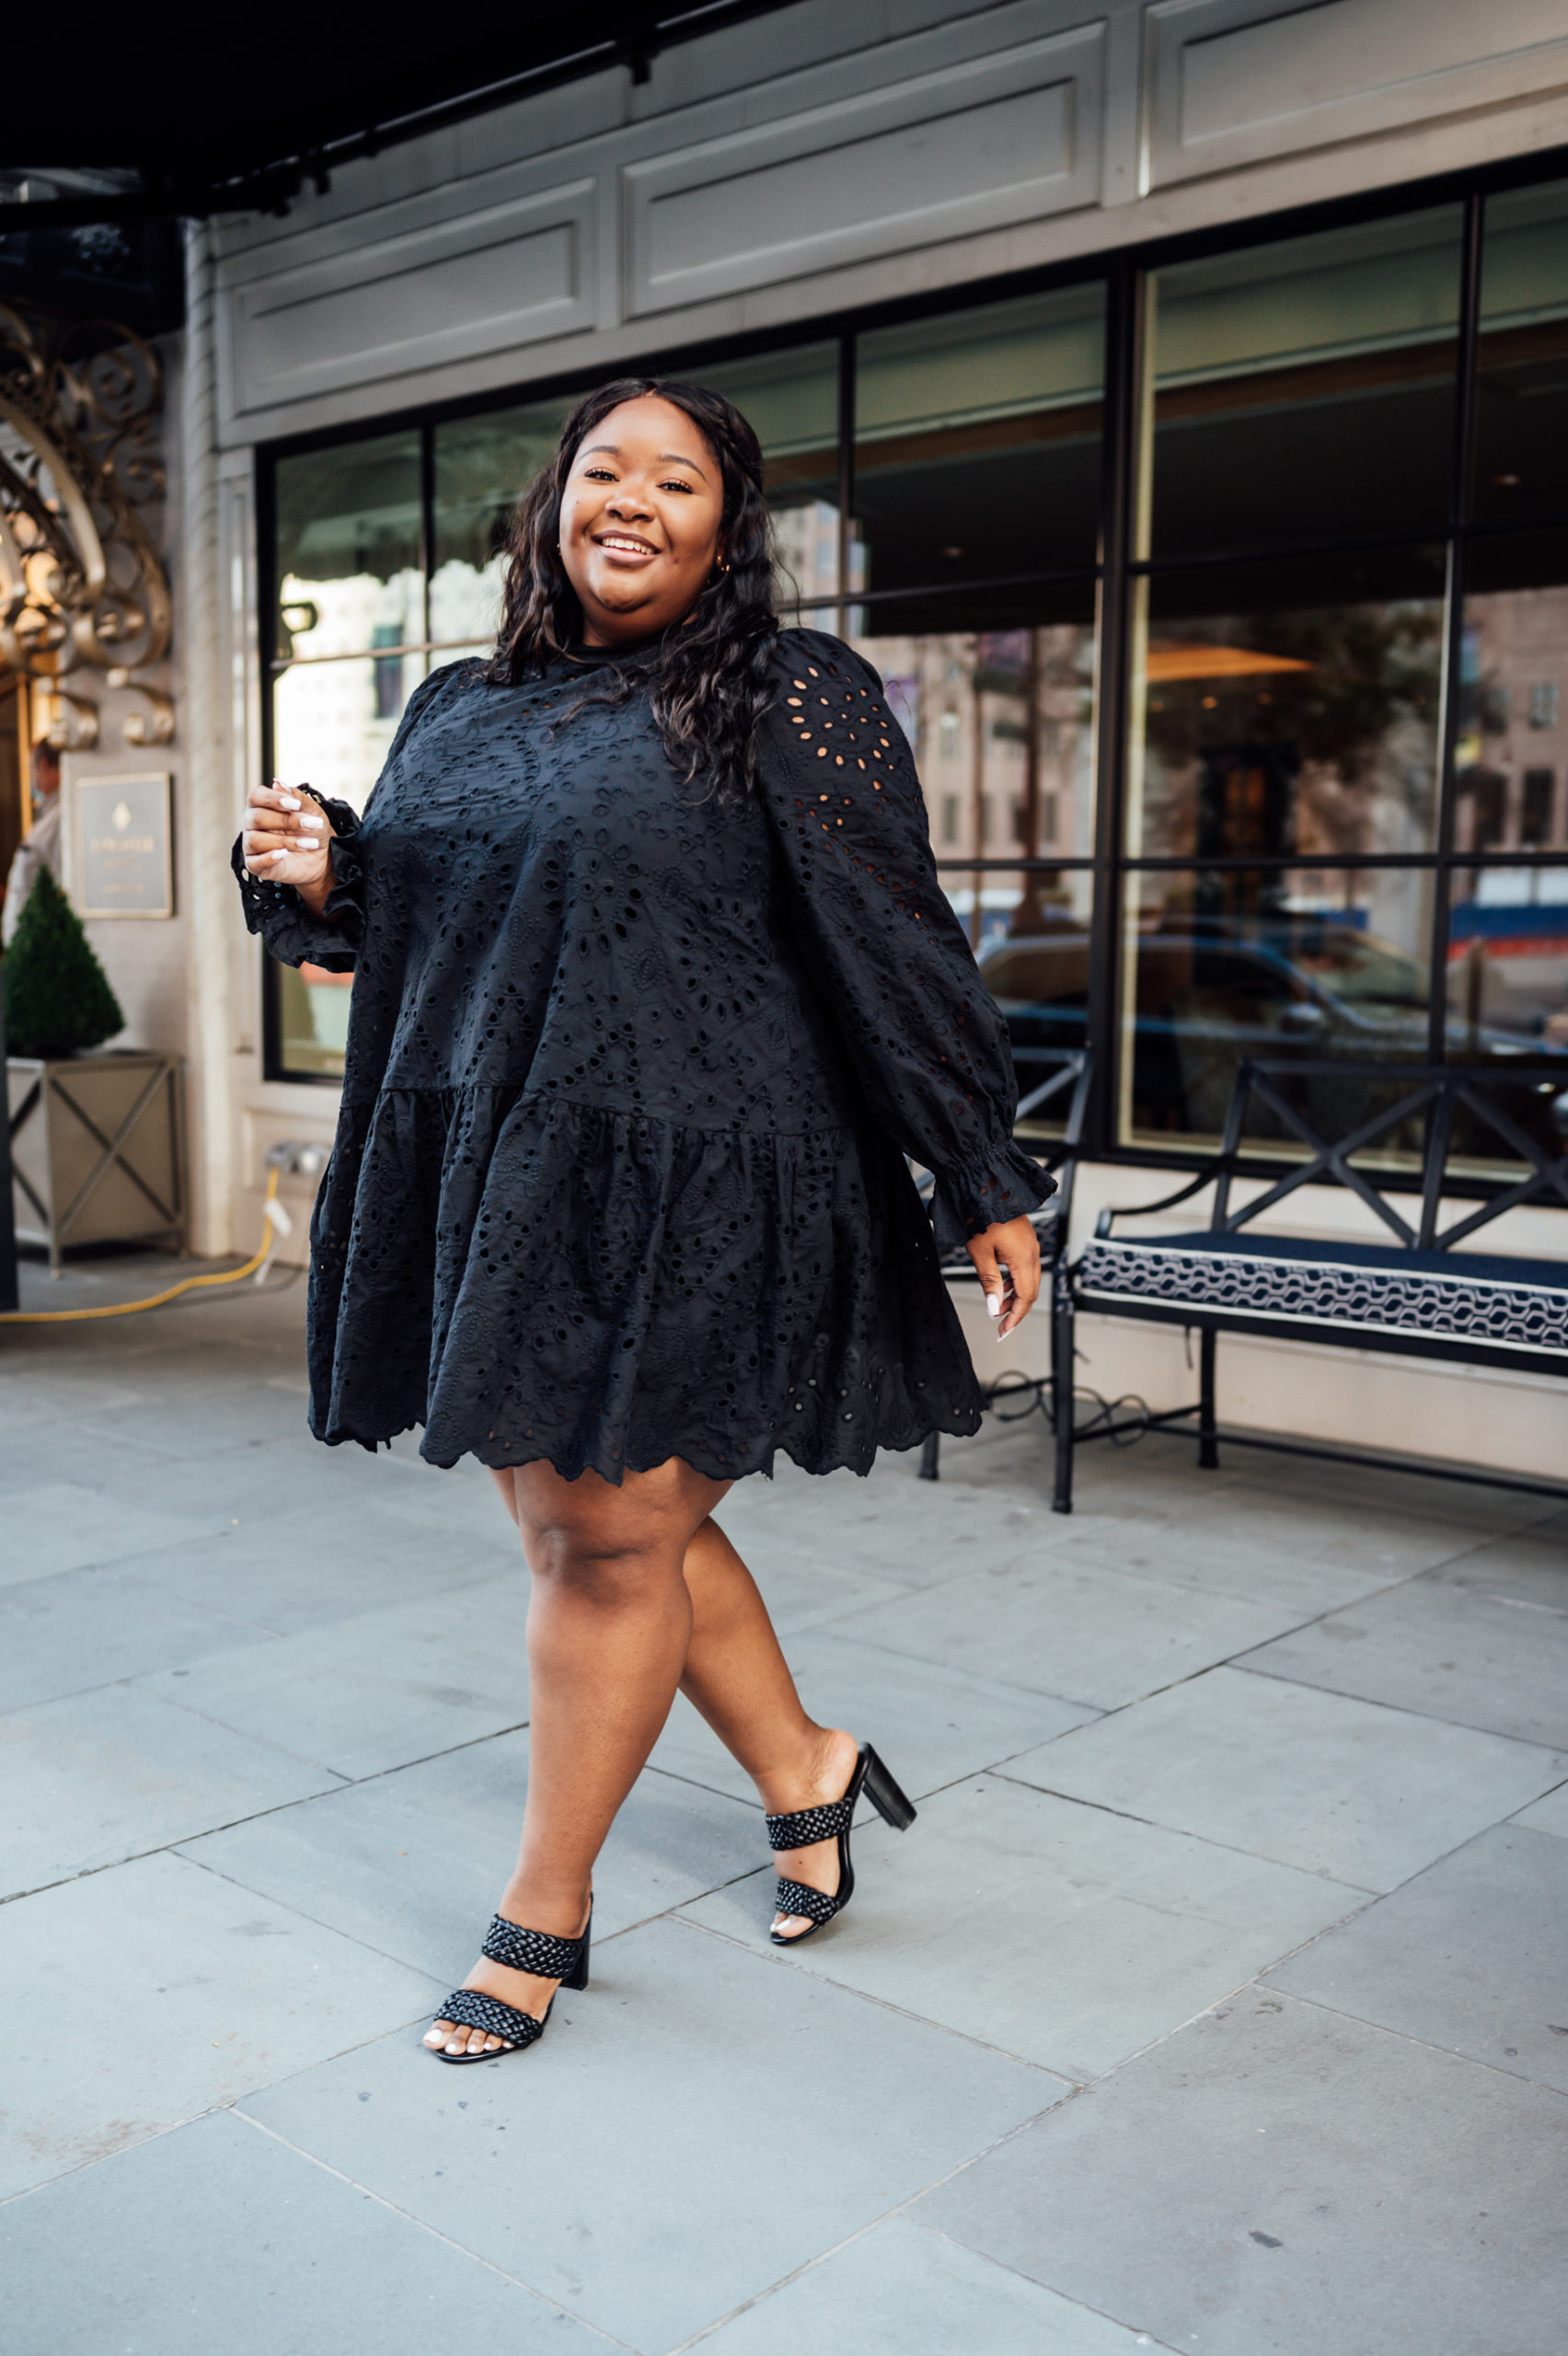 From Head to Curve in a black lace plus size dress for a date night outfit with braided amazon heels.